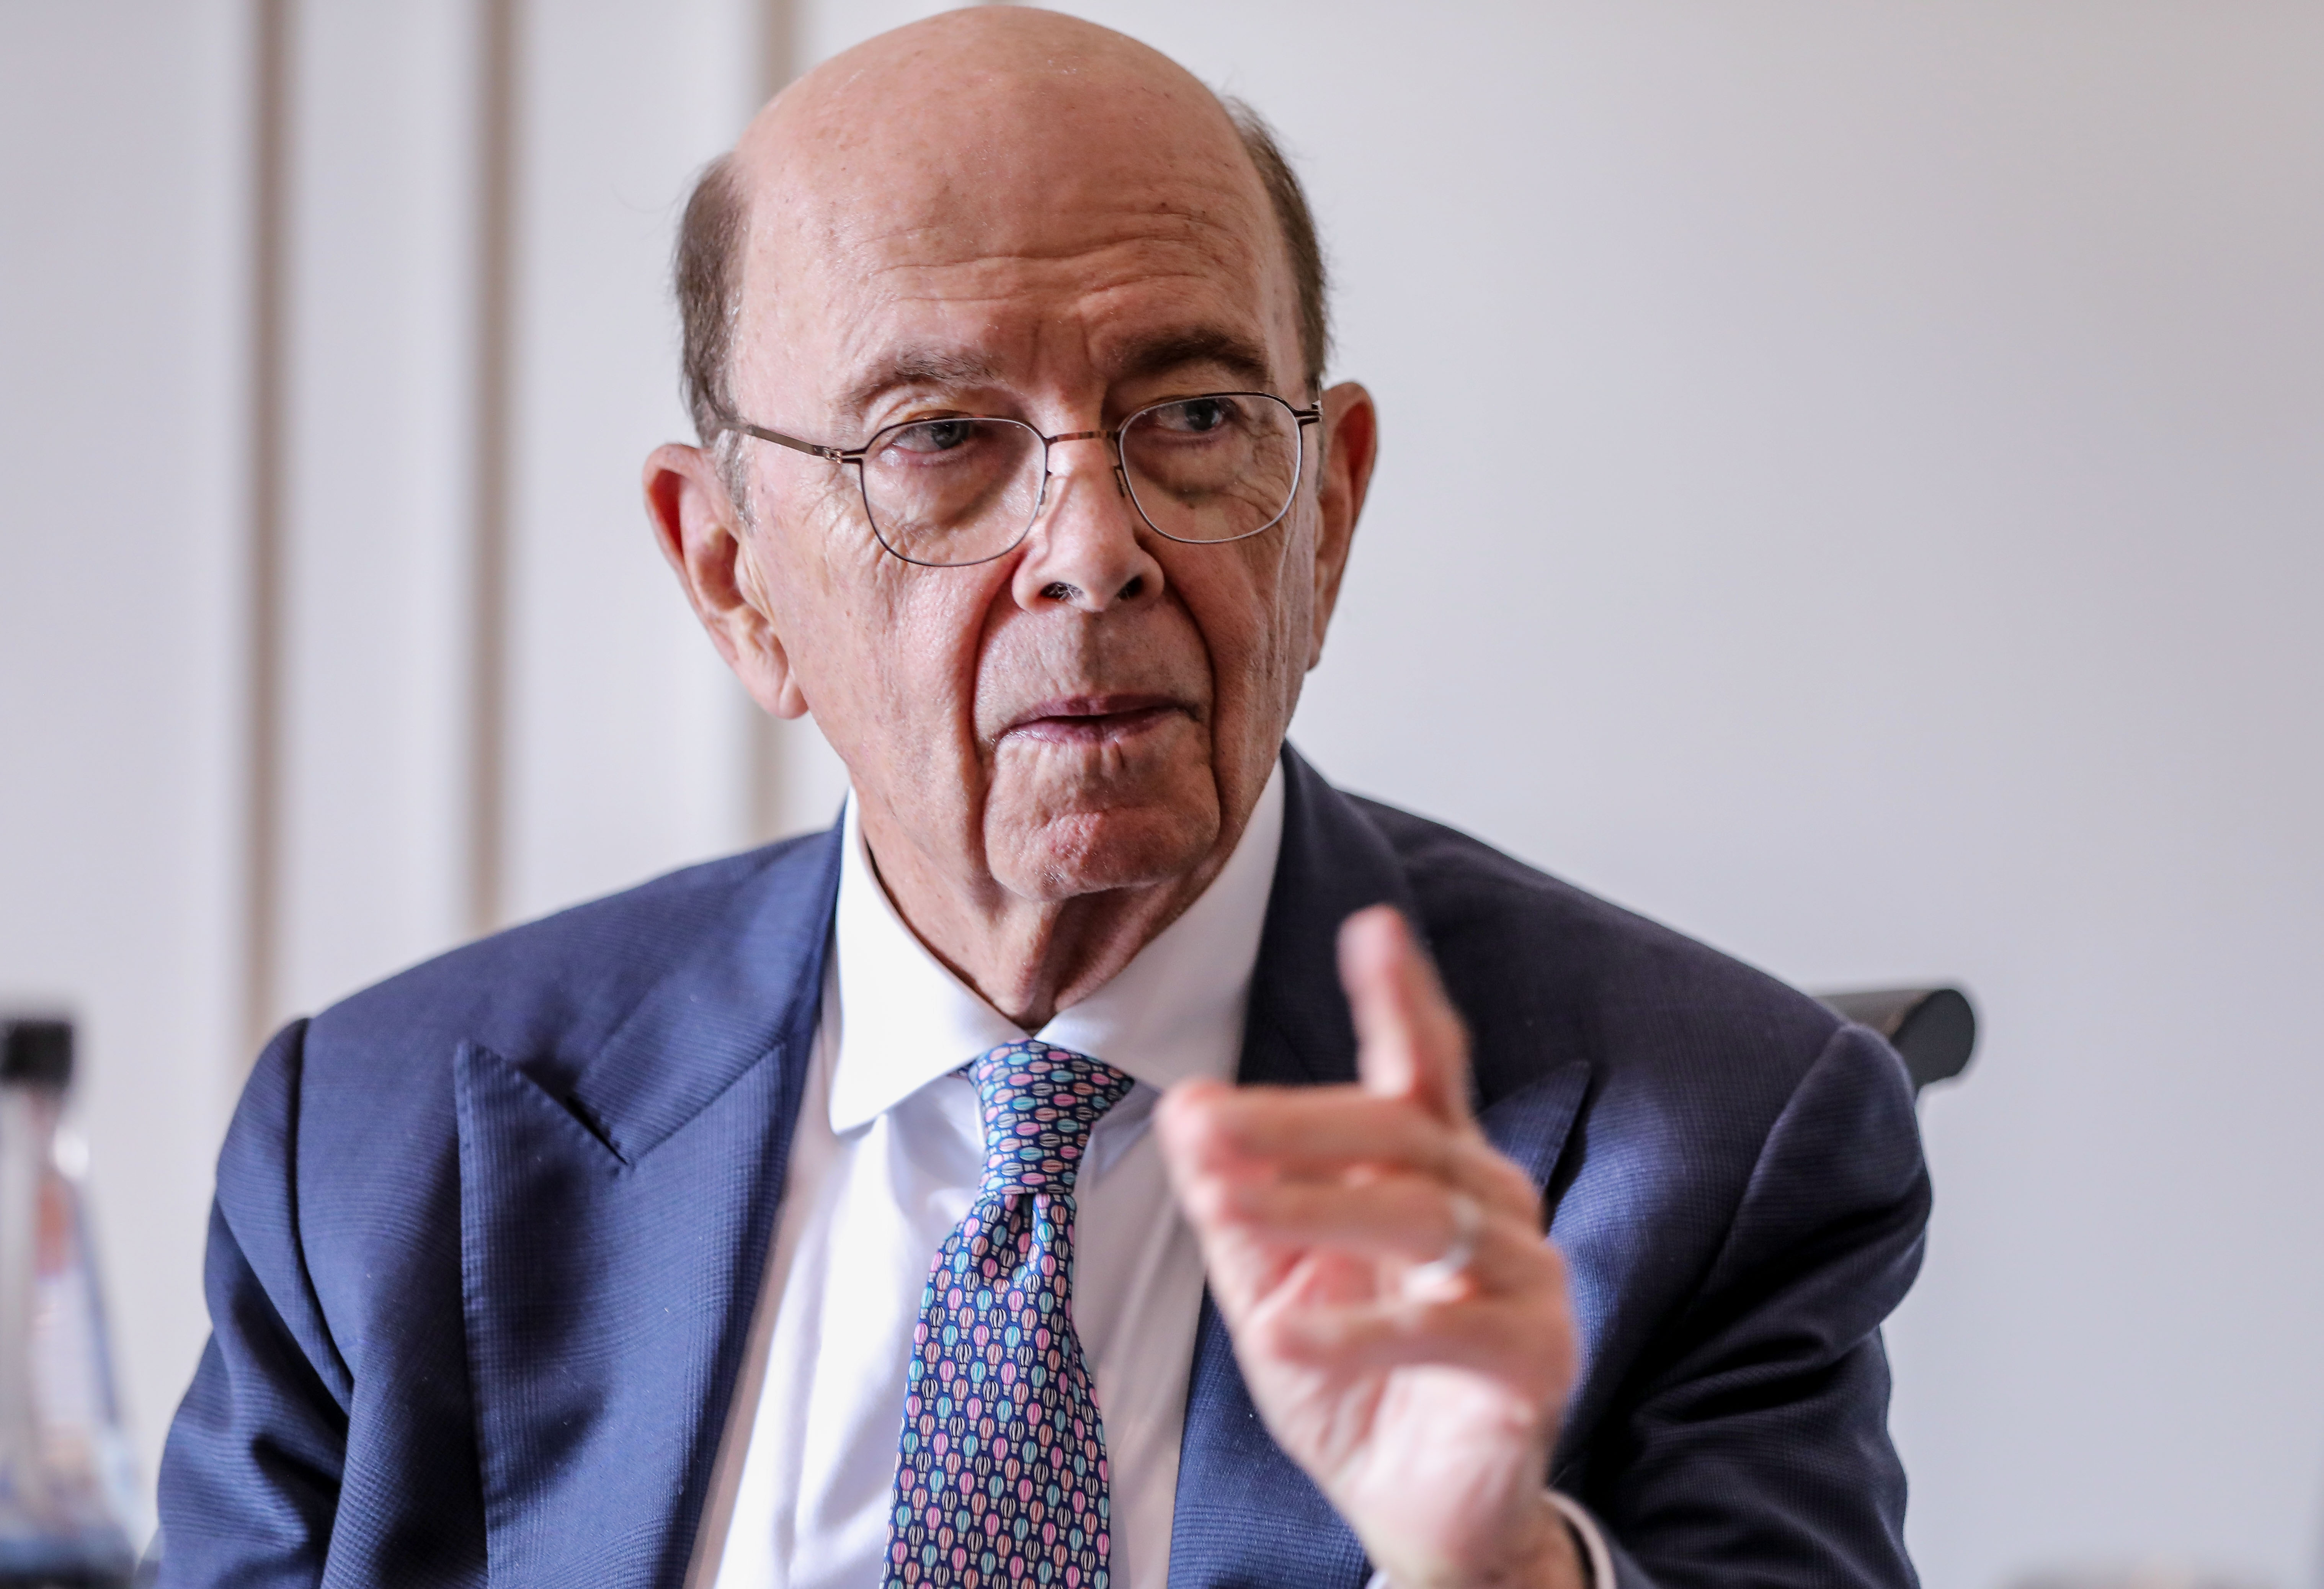 Agriculture, energy, defense purchases would help reduce US trade deficit with Vietnam: Wilbur Ross